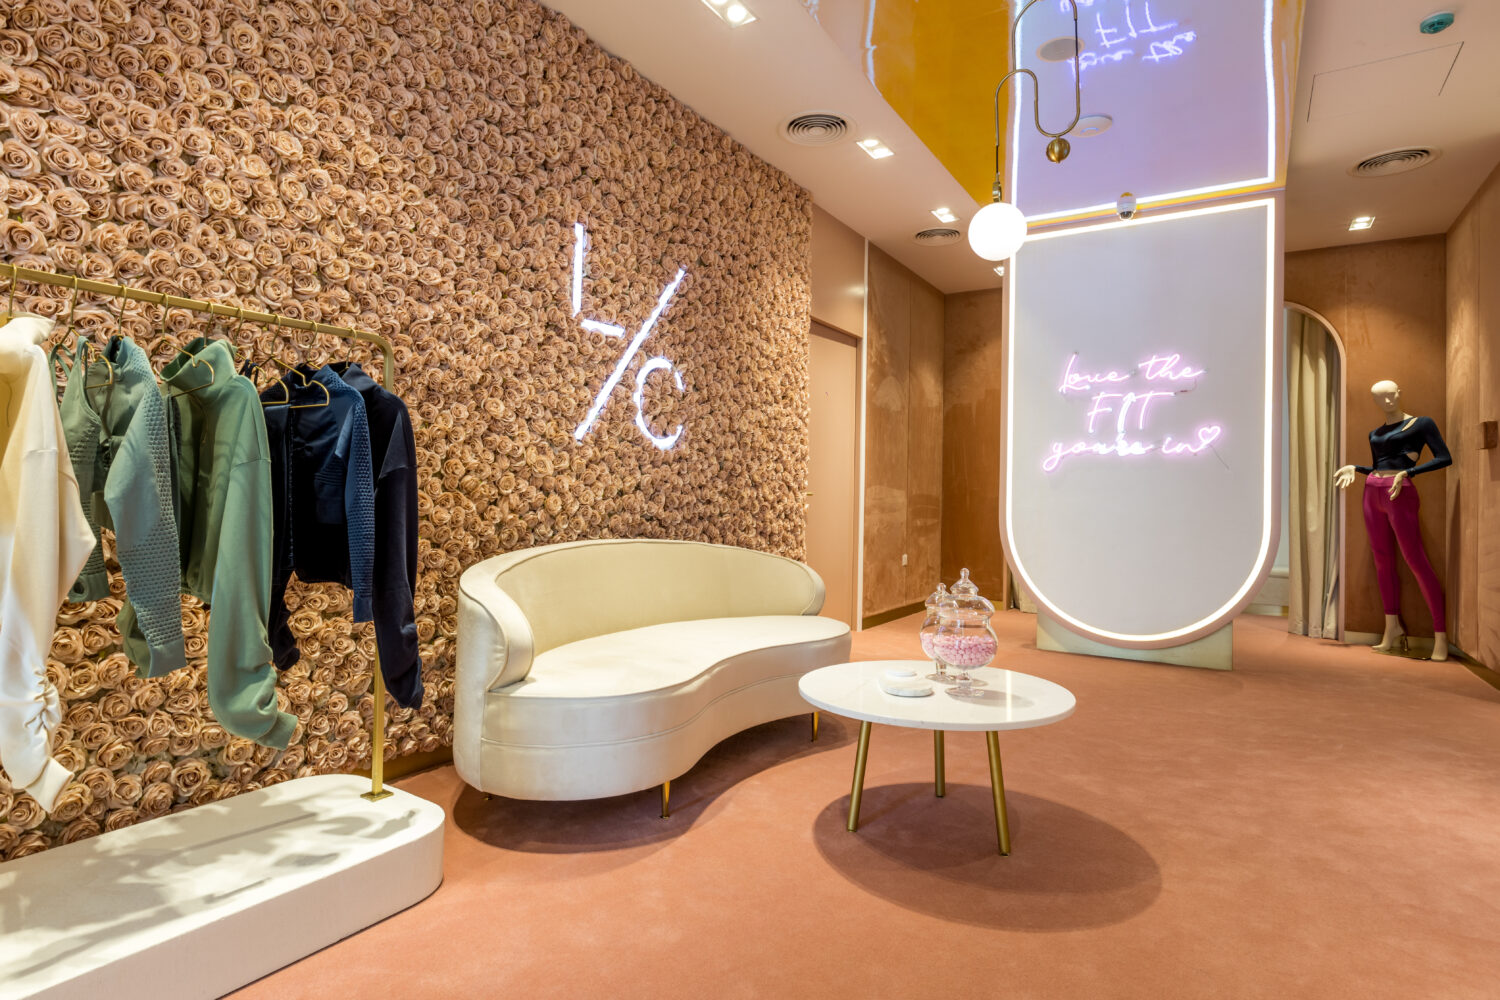 L'Couture Just Opened Its Flagship Boutique In Dubai - MOJEH